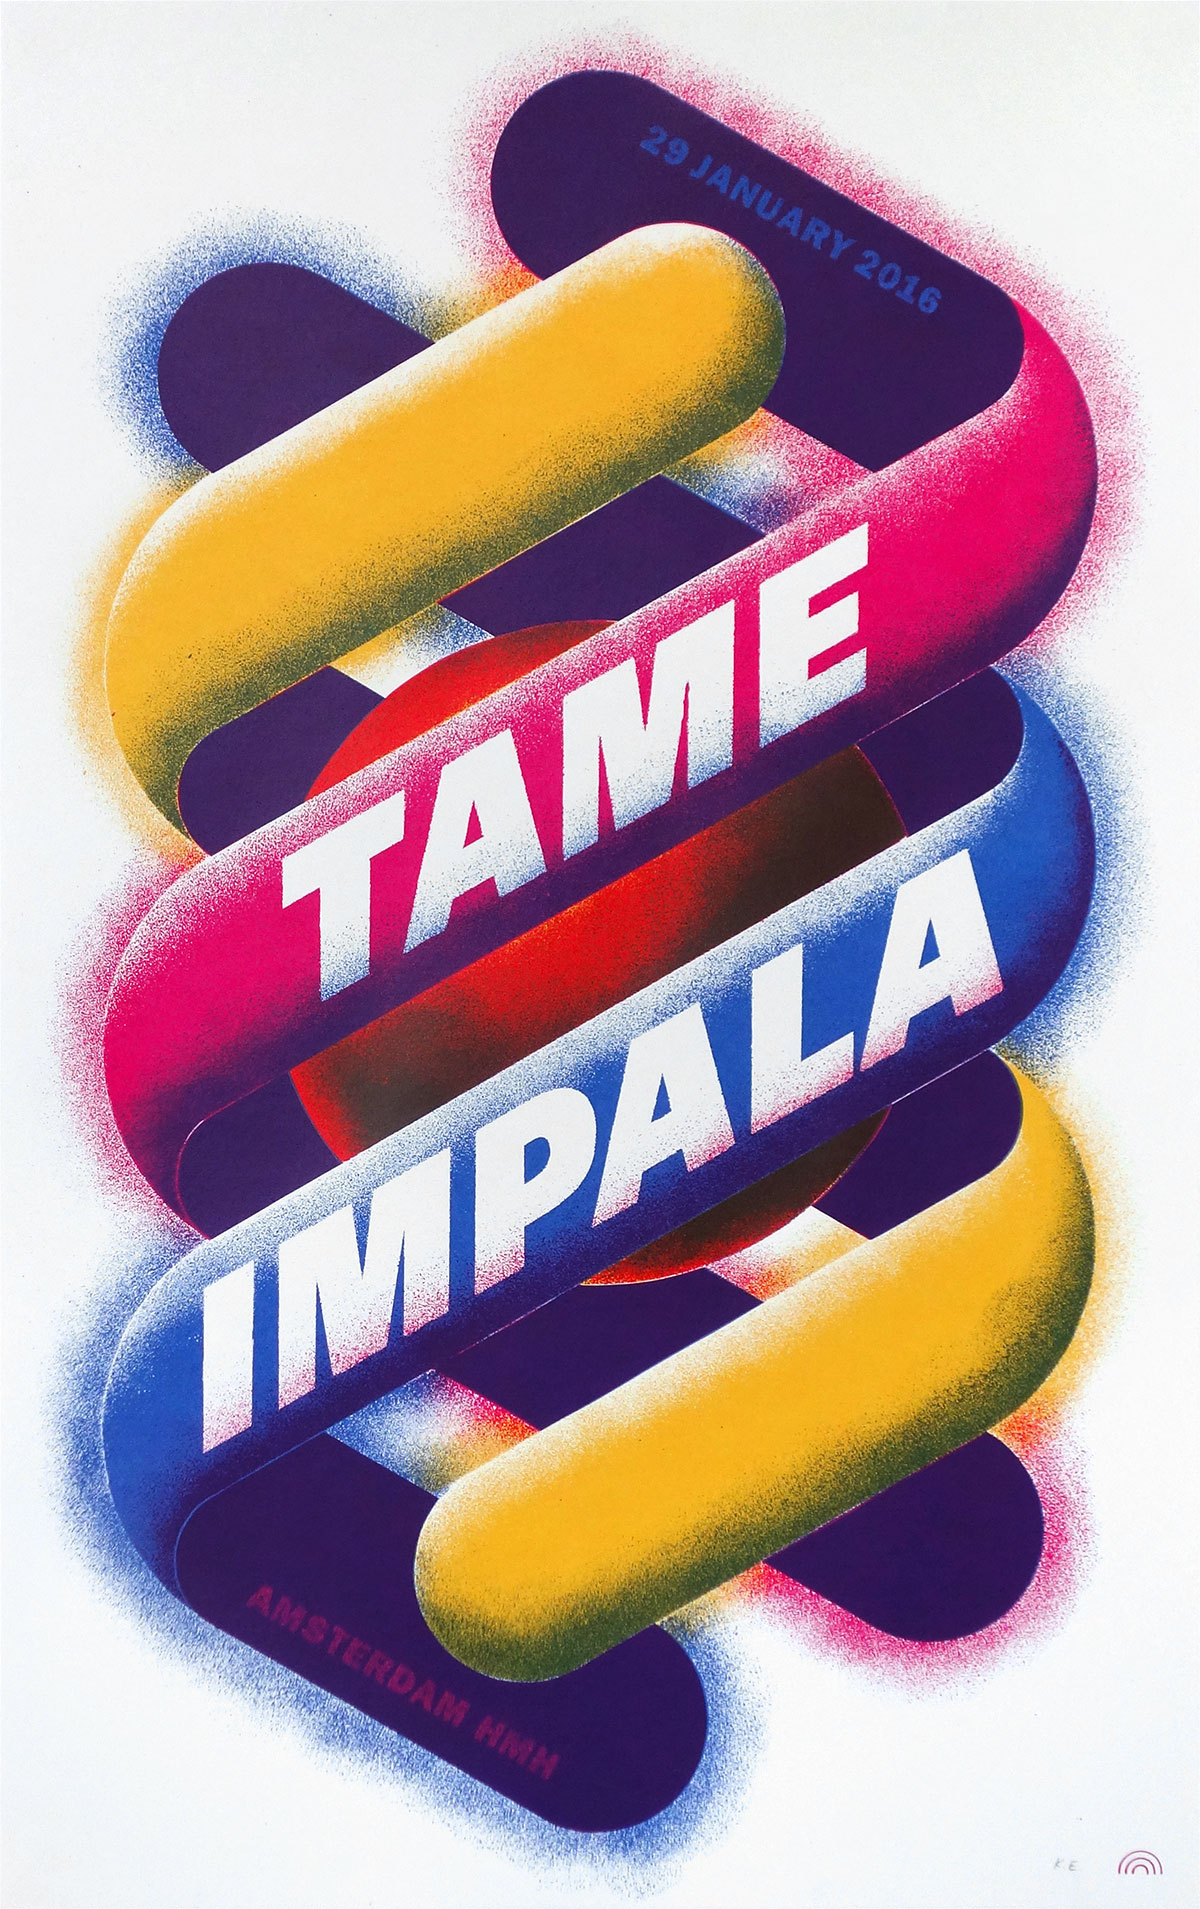 Tame Impala gigposter 01 by Rainbow Posters